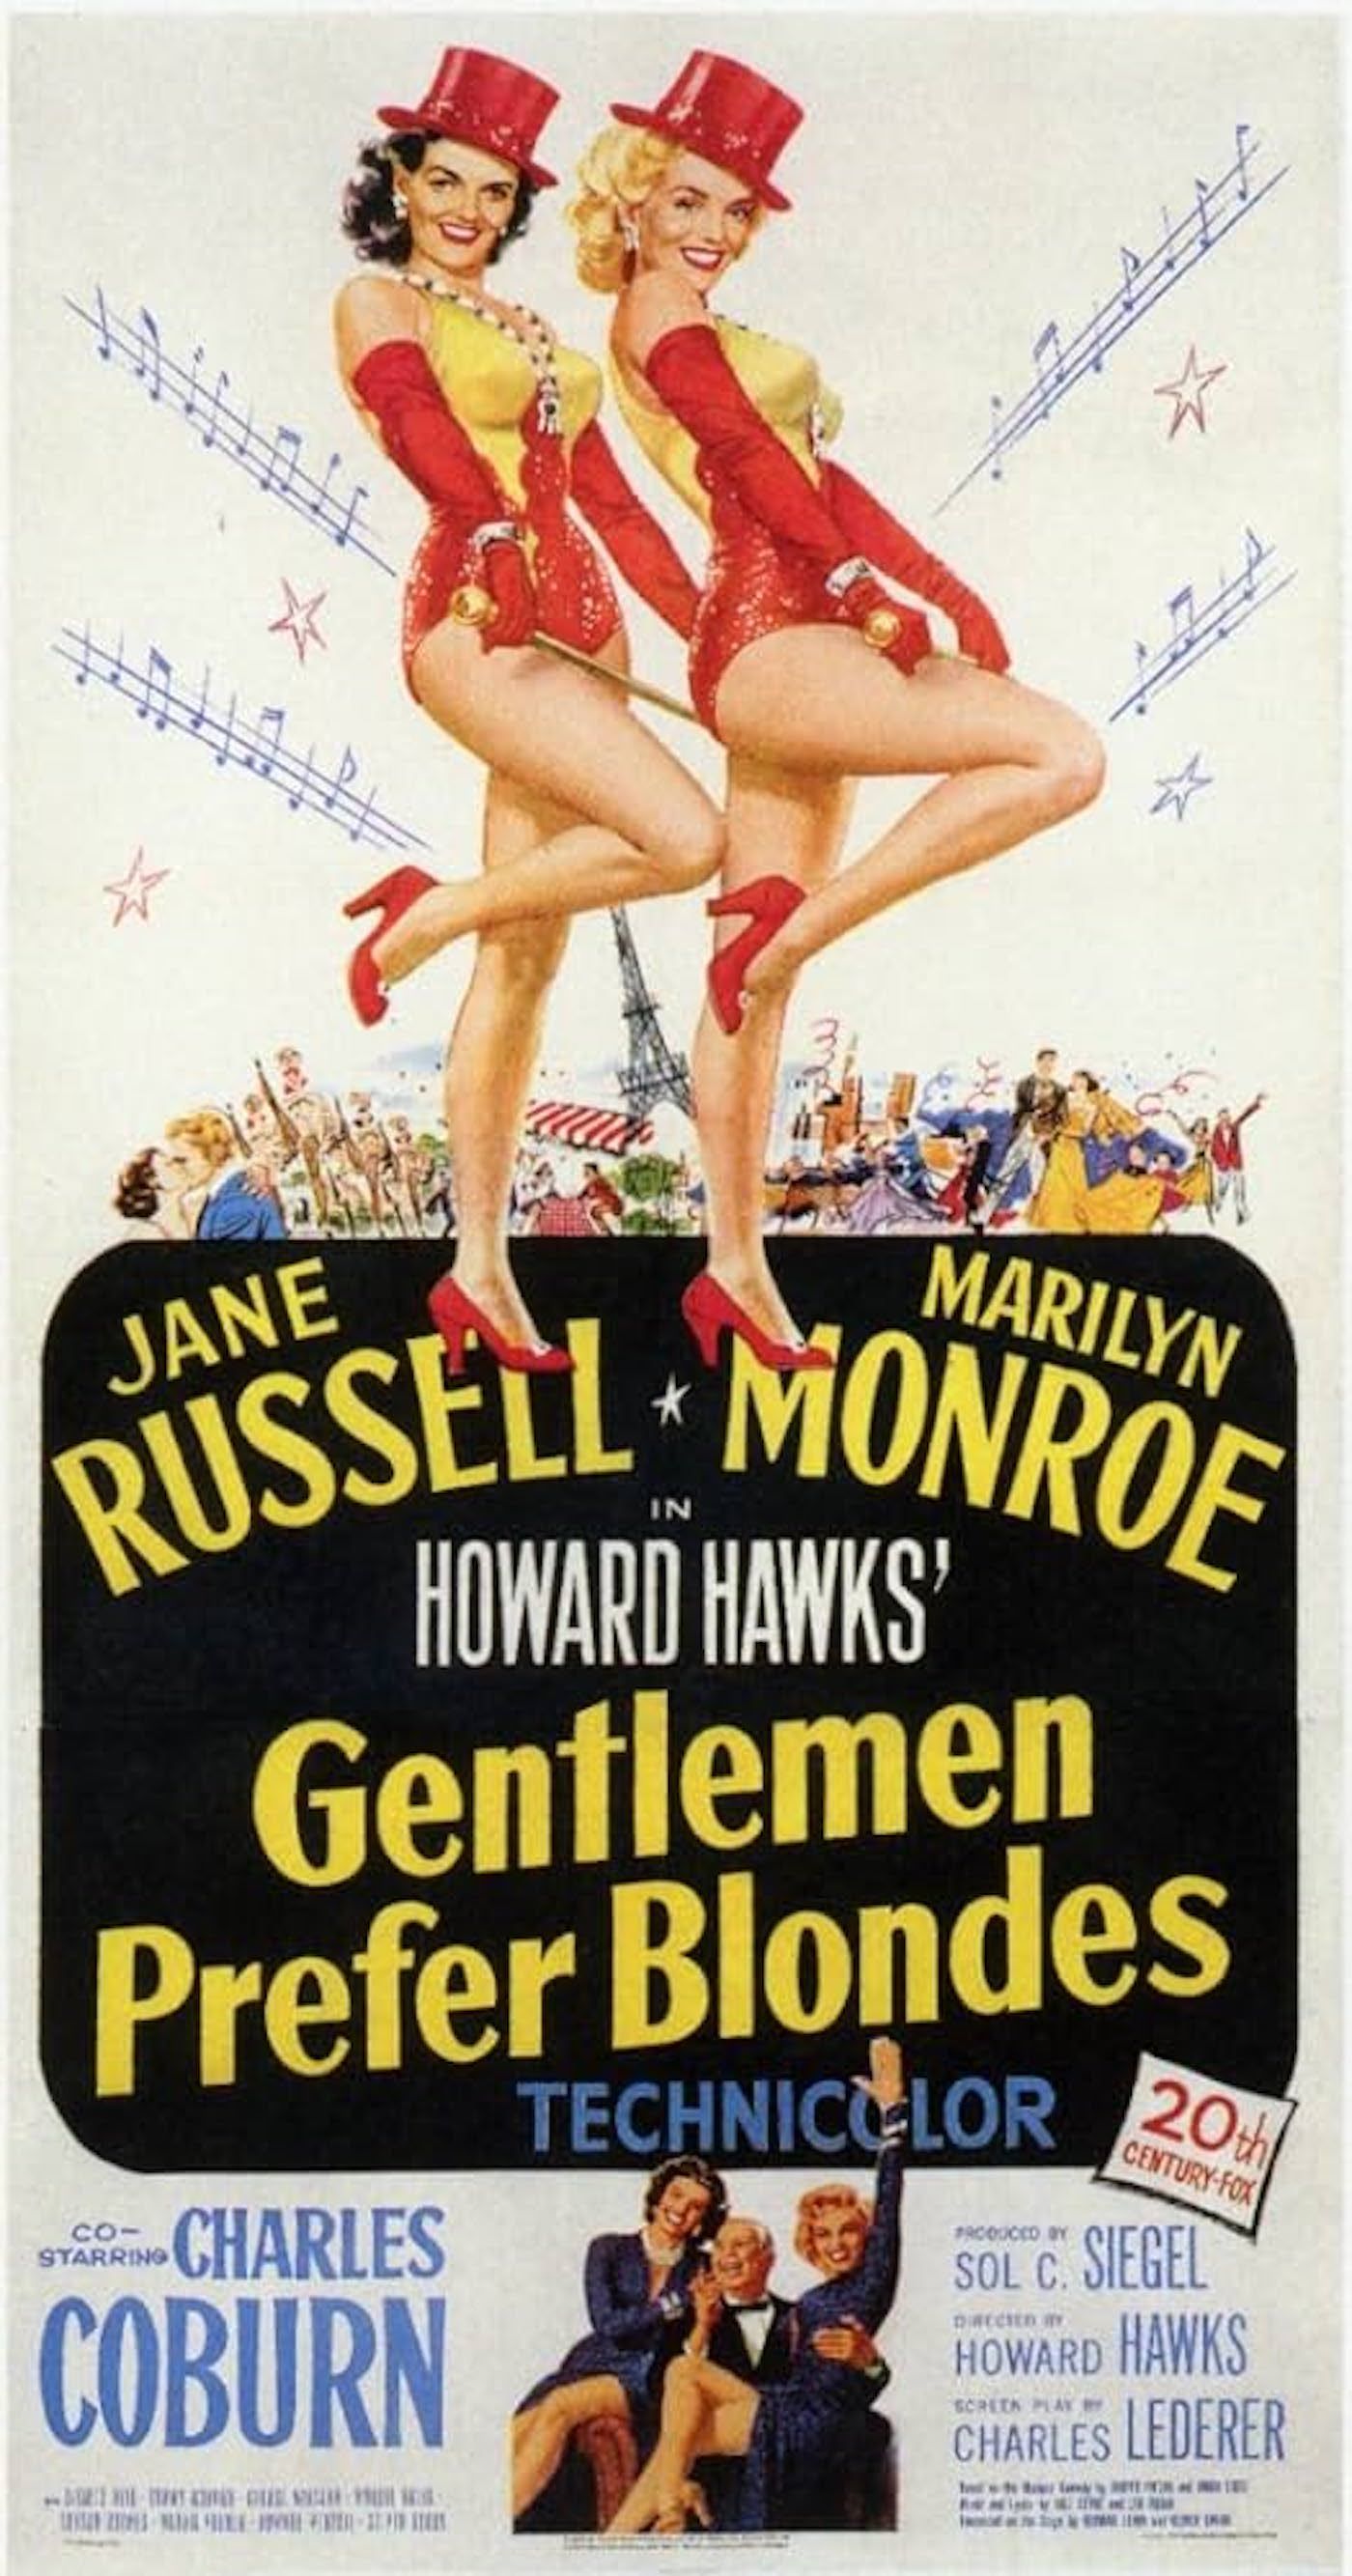 Marilyn Monroe and Jane Russell on the Gentlemen Prefer Blondes movie poster